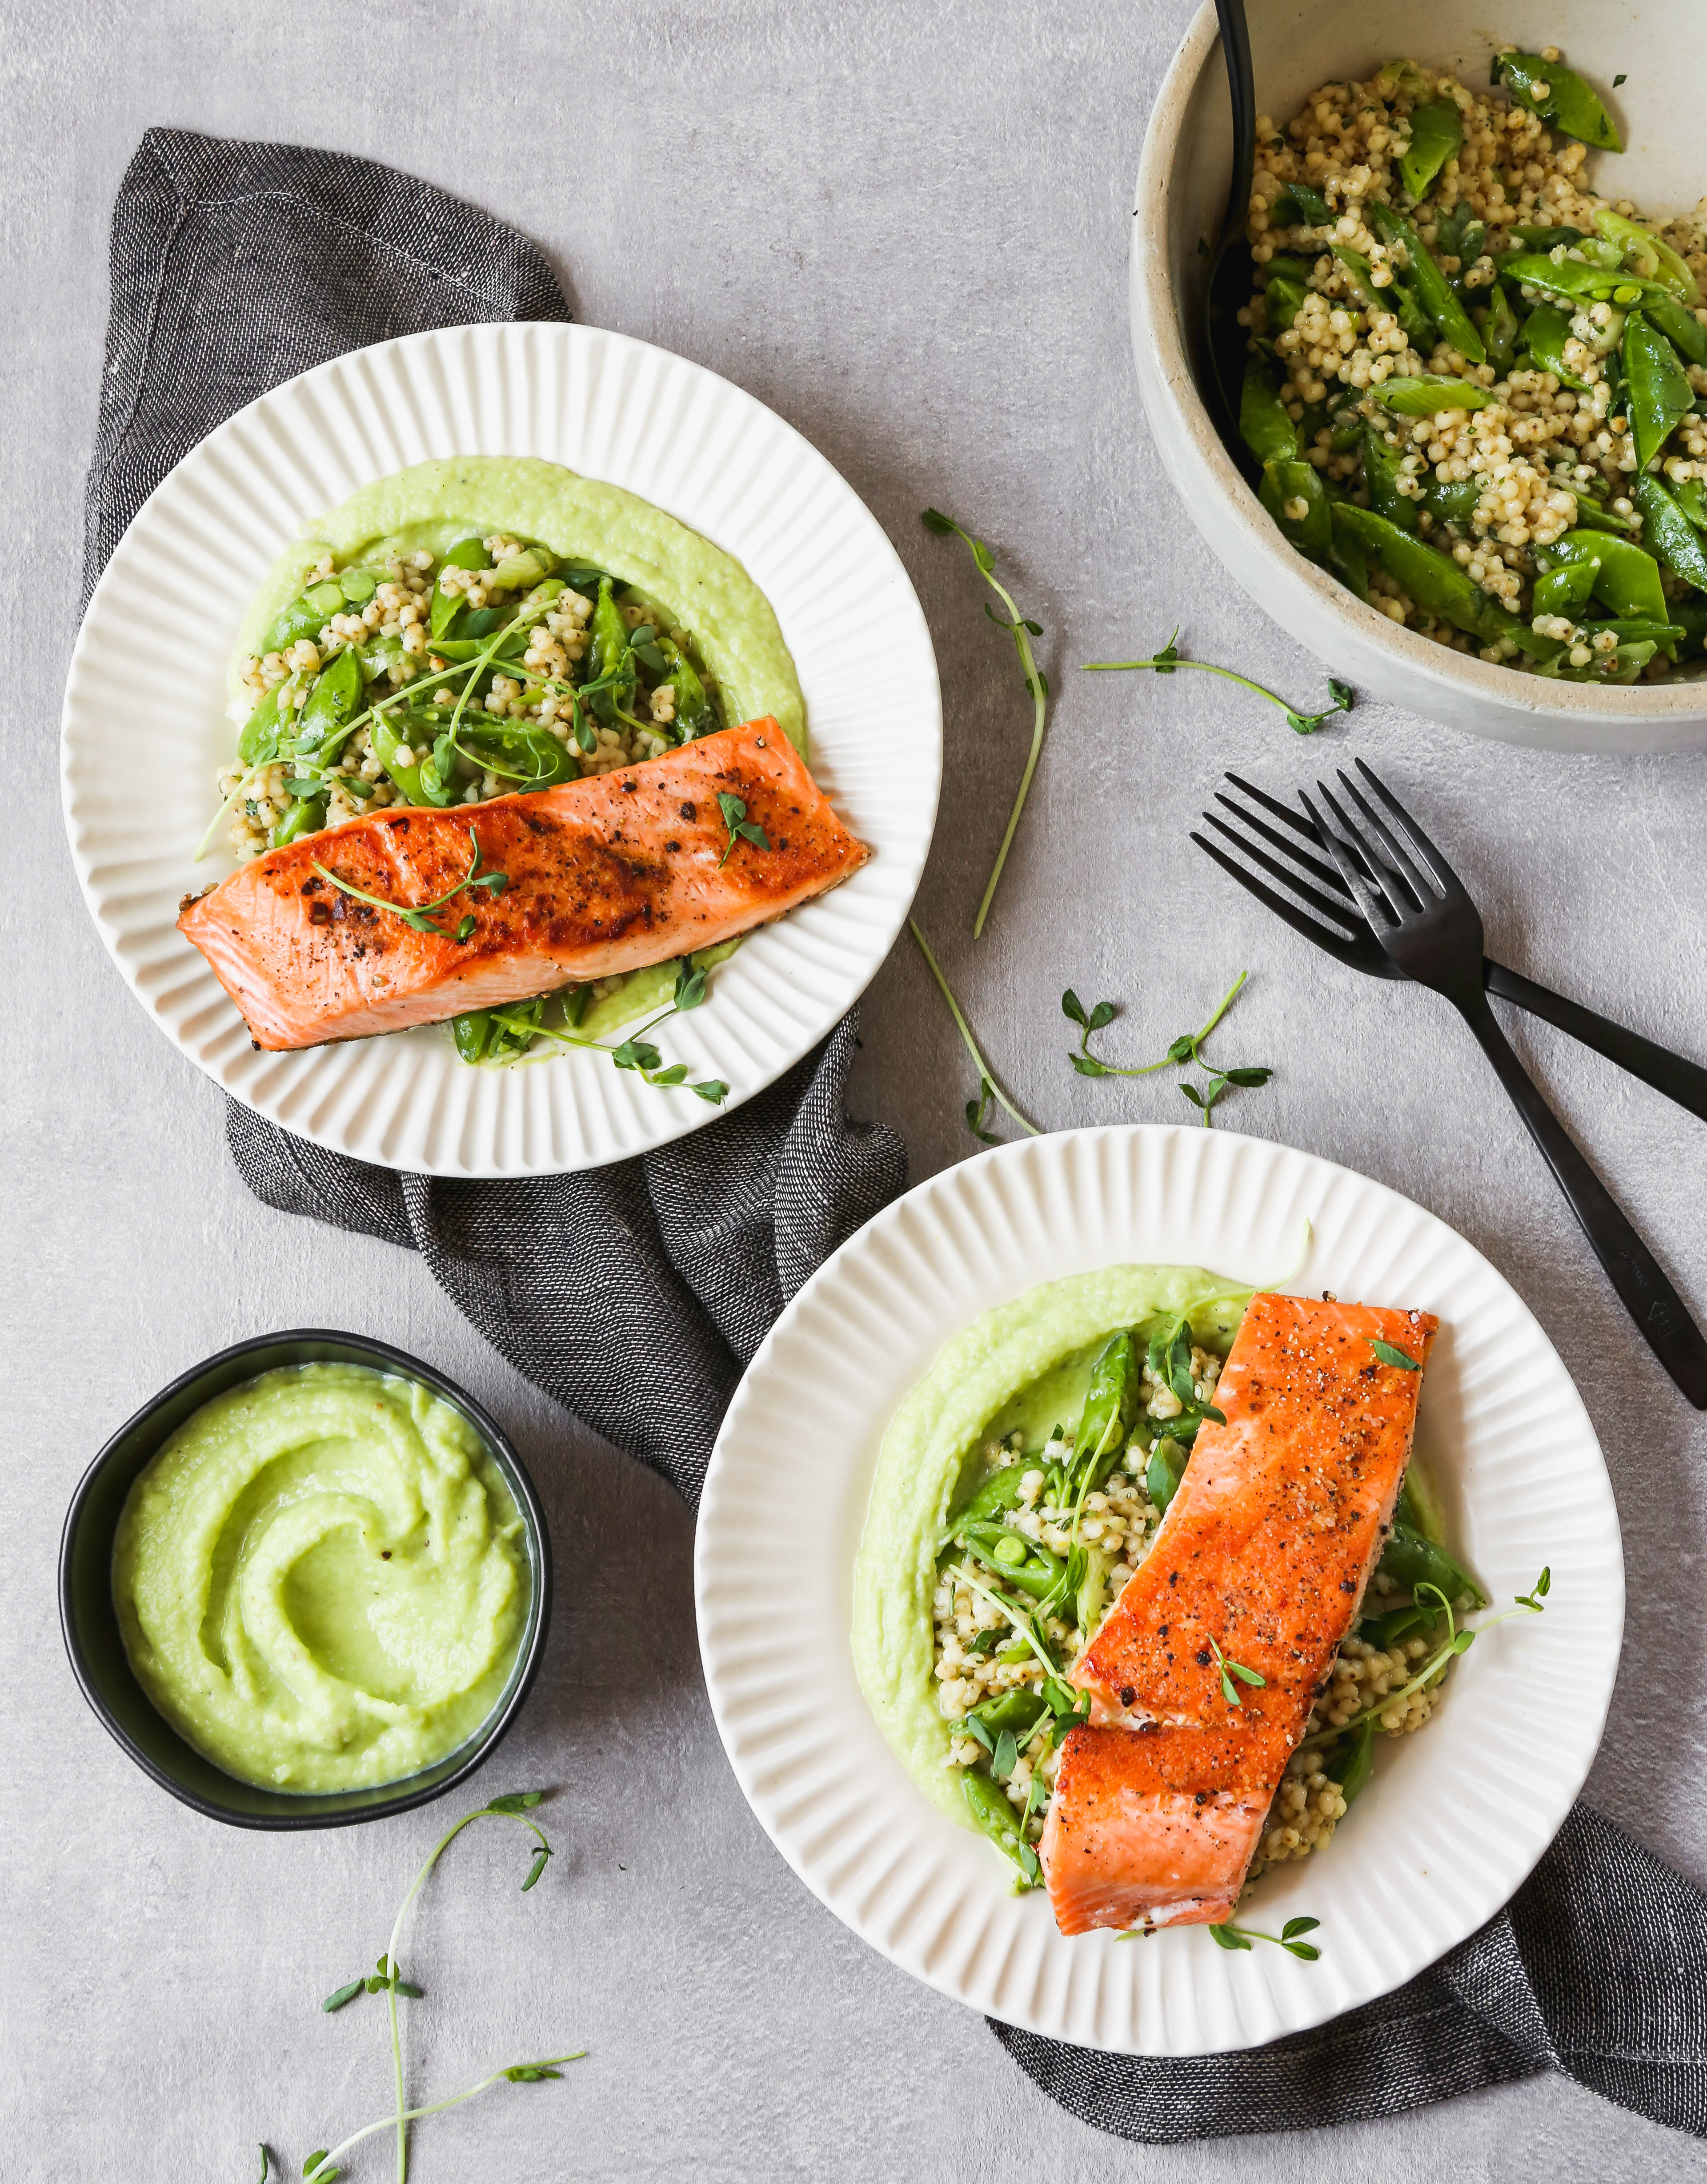 pan Seared salmon on white plates with green sauce and grain salad, set on a gray background.